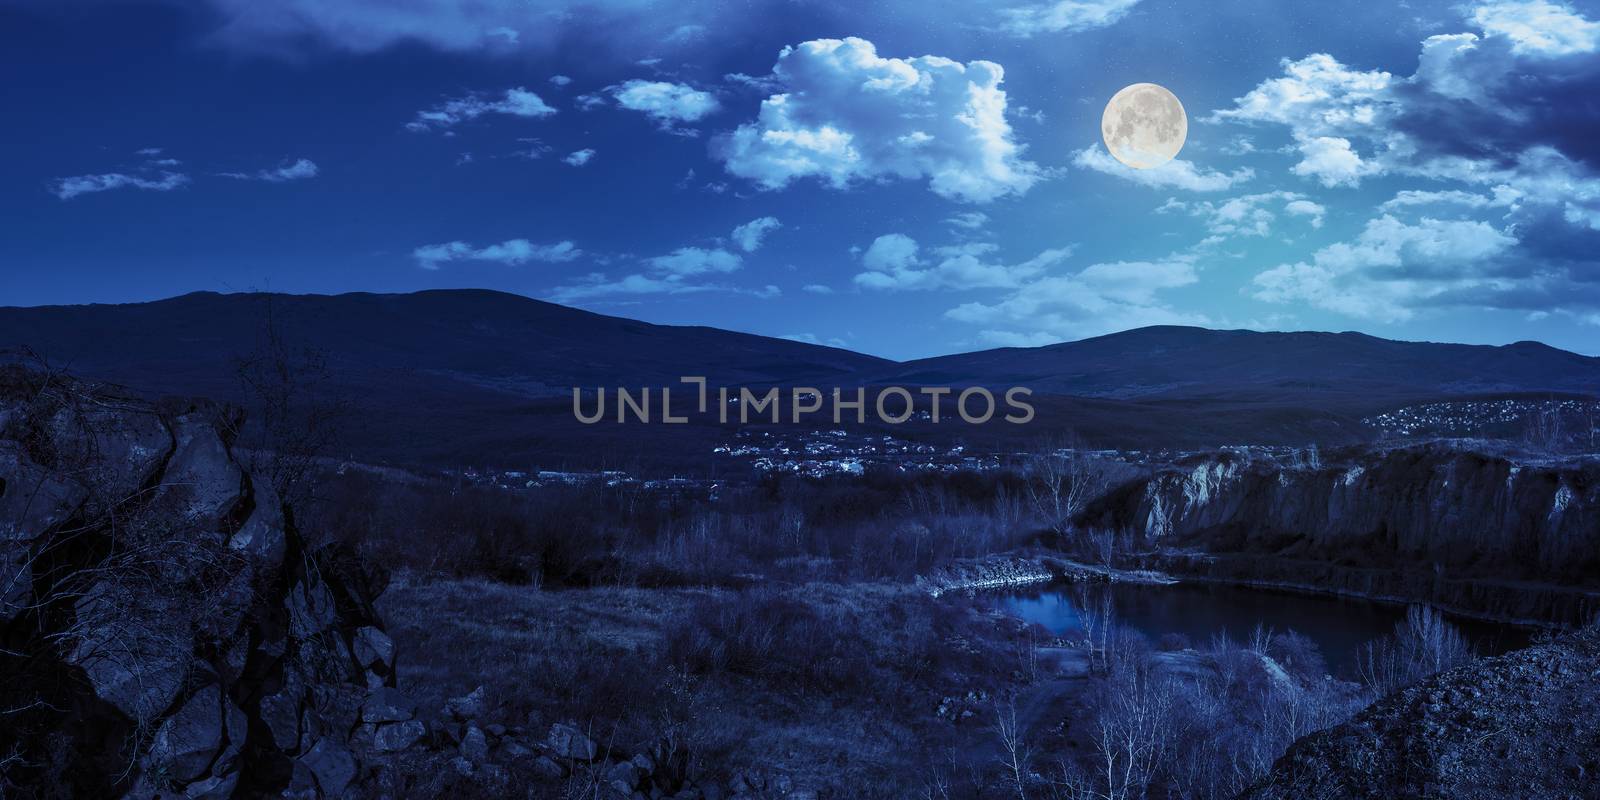 collage of small lake in an abandoned stone quarry in the mountains outside the city at night in full moon light